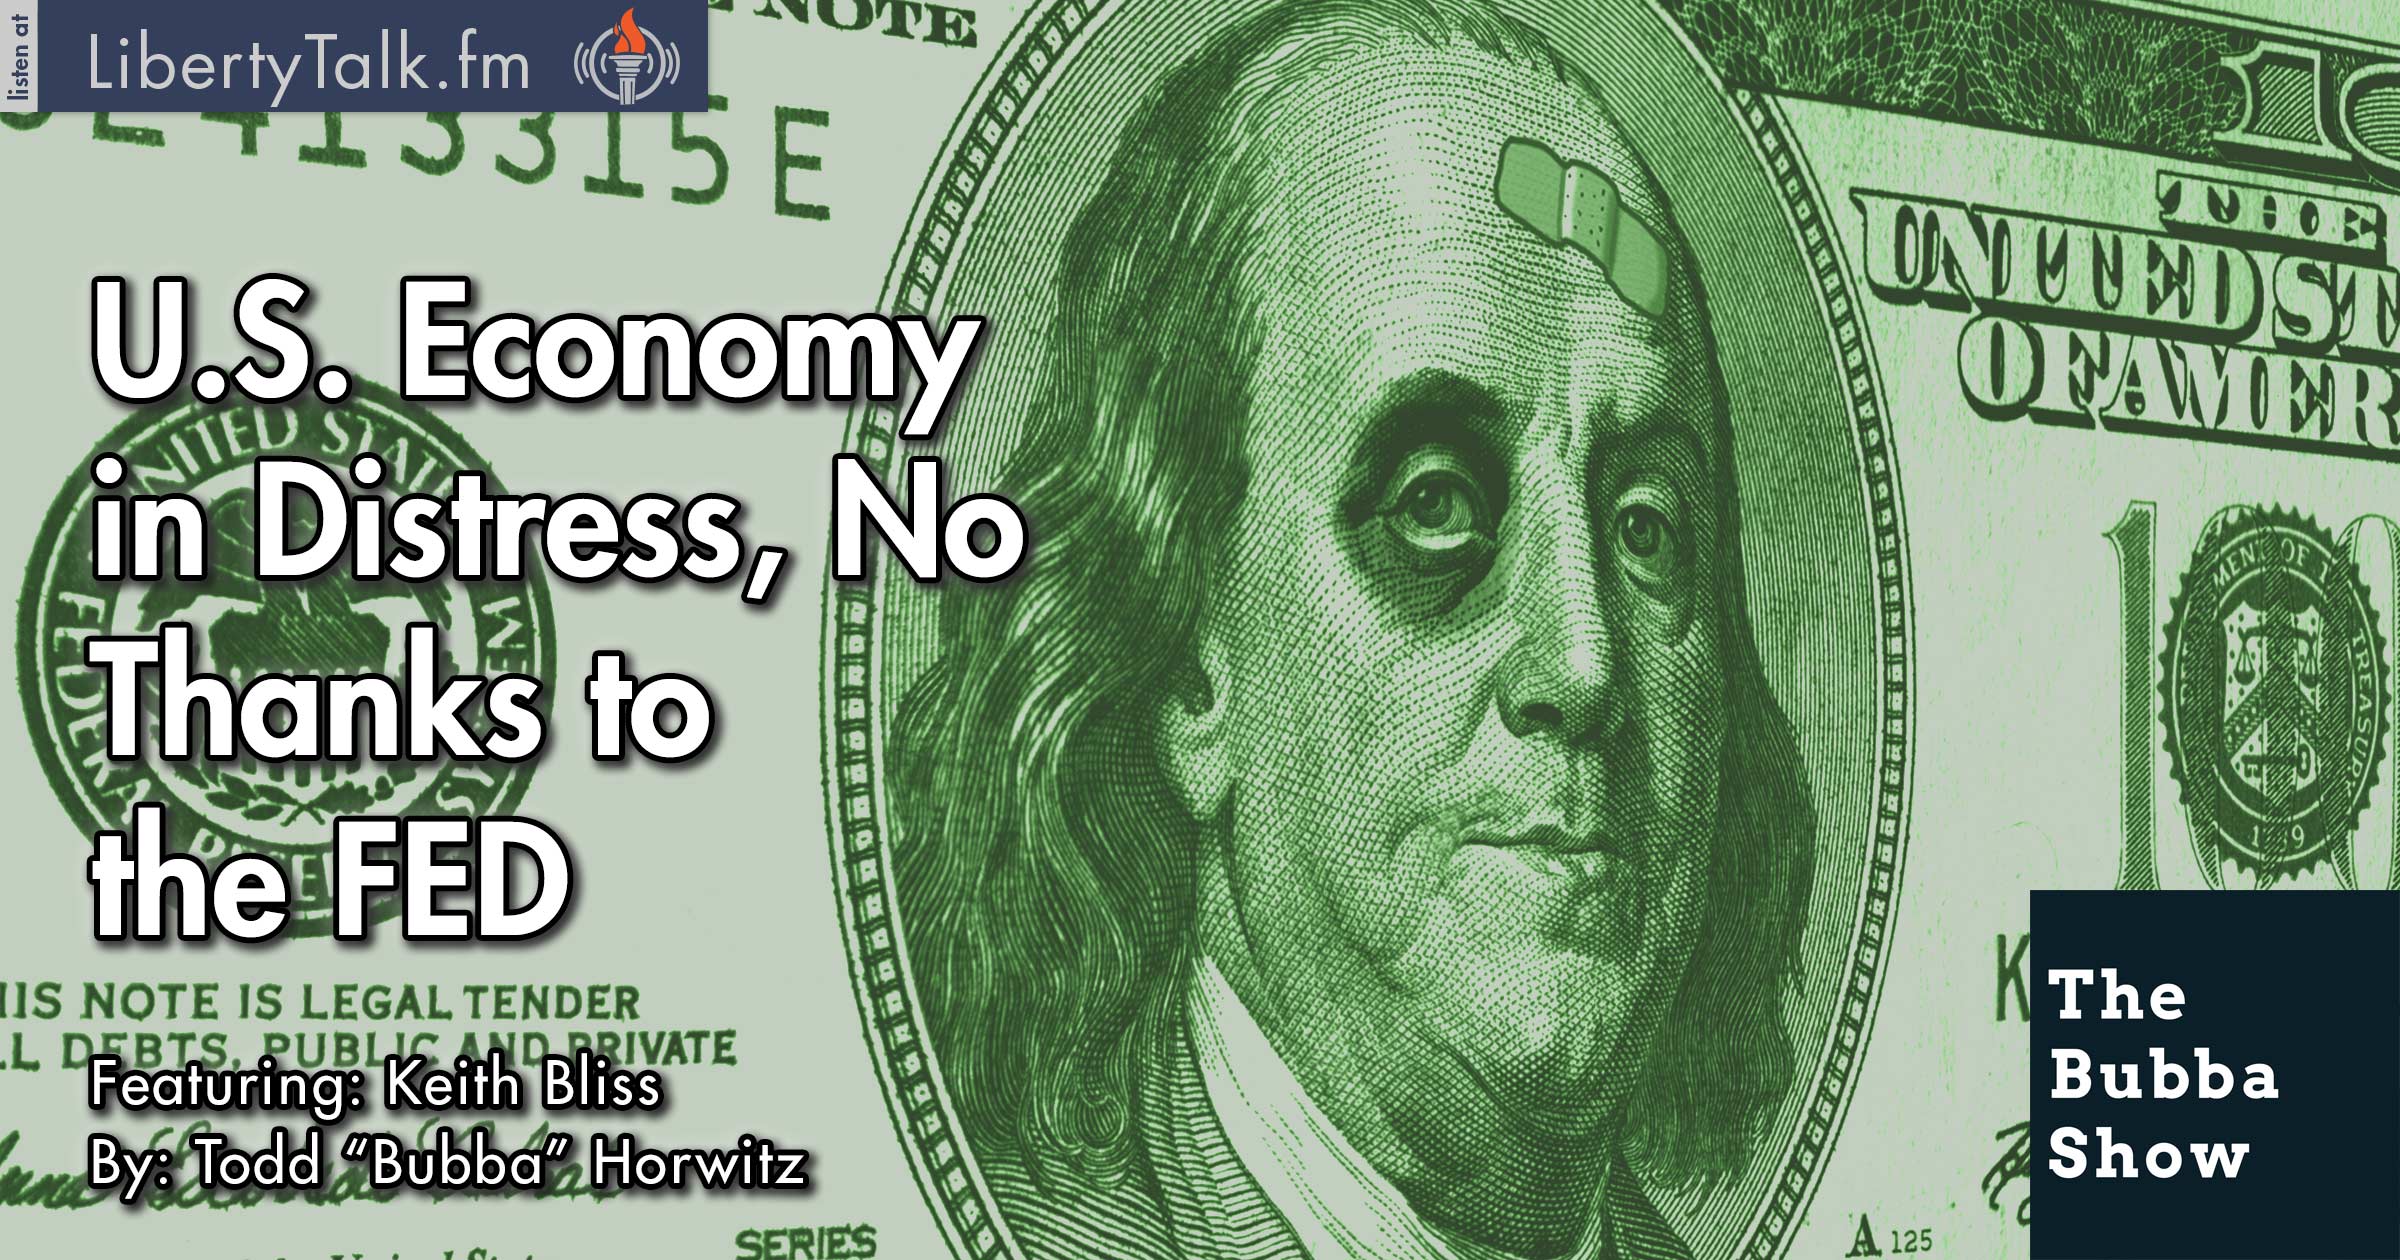 U.S. Economy in Distress, No Thanks to the FED - The Bubba Show